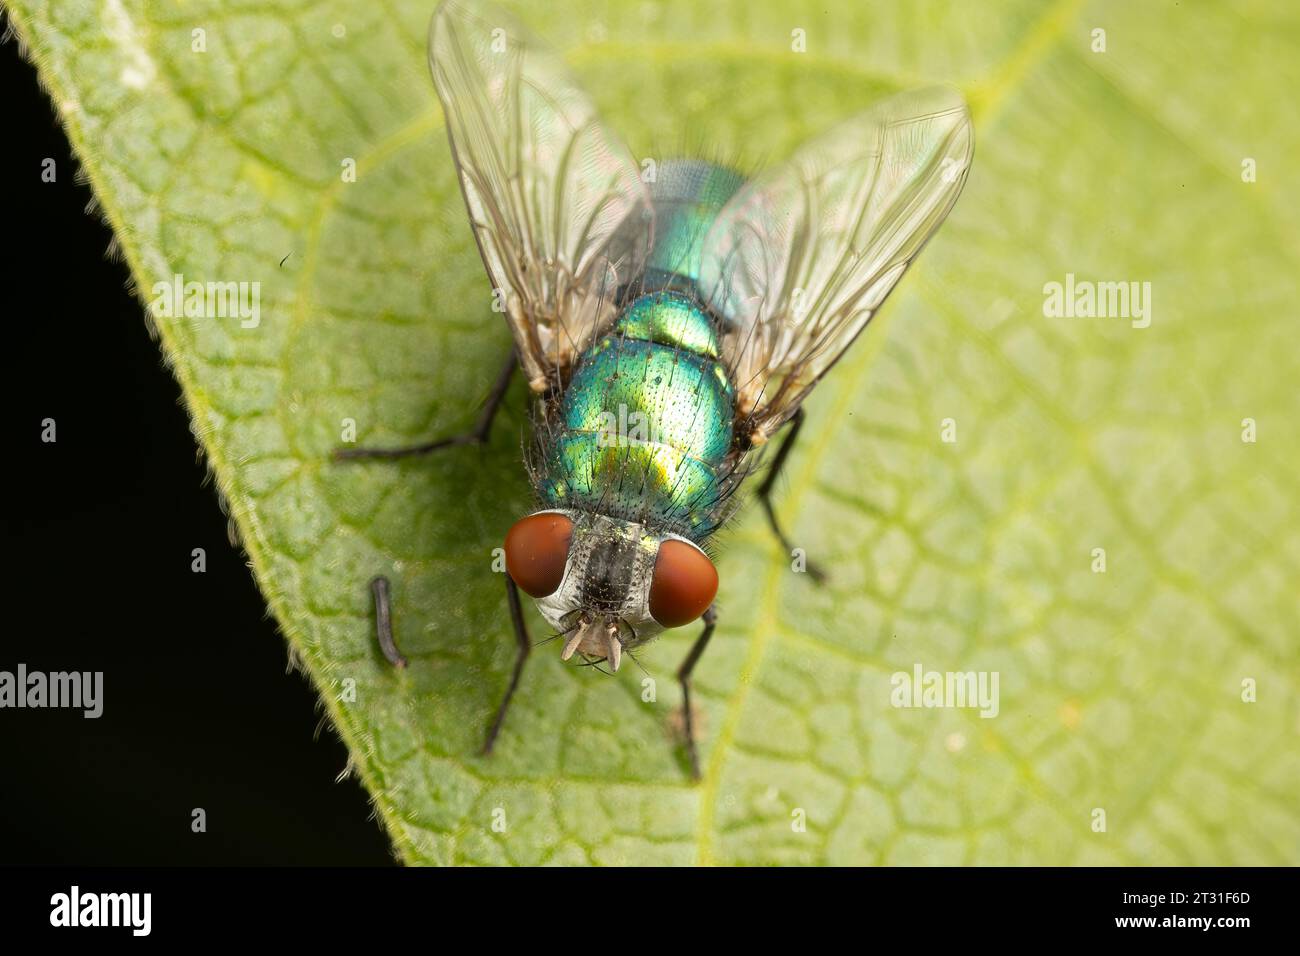 Adult greenbottle fly, one of the commonest, best known flies in the UK, and yet remarkably beautiful when seen close up. Stock Photo